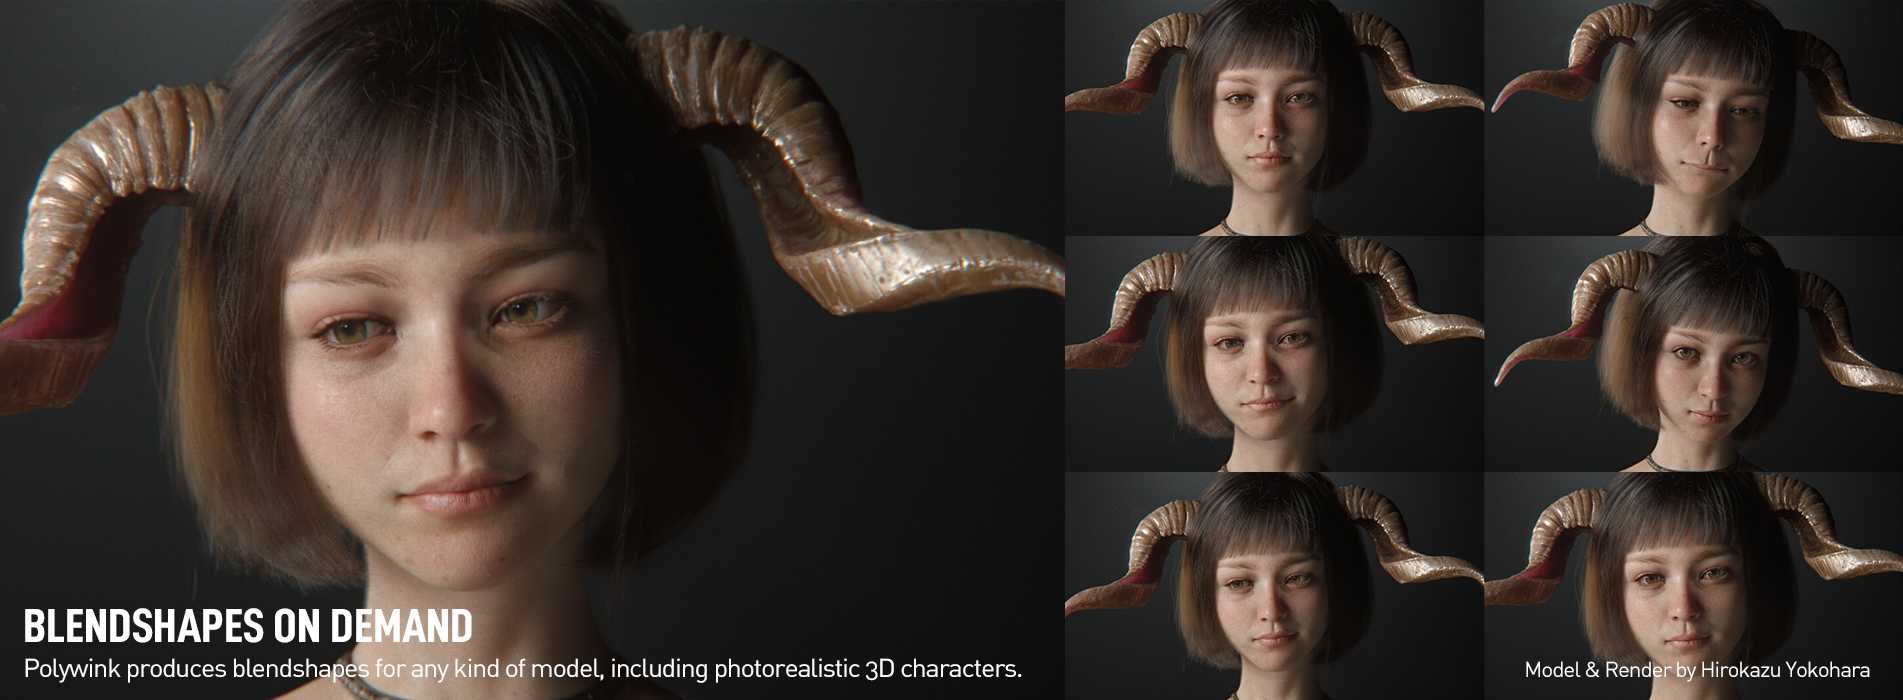 Polywink Blendshapes for Photorealistic Models